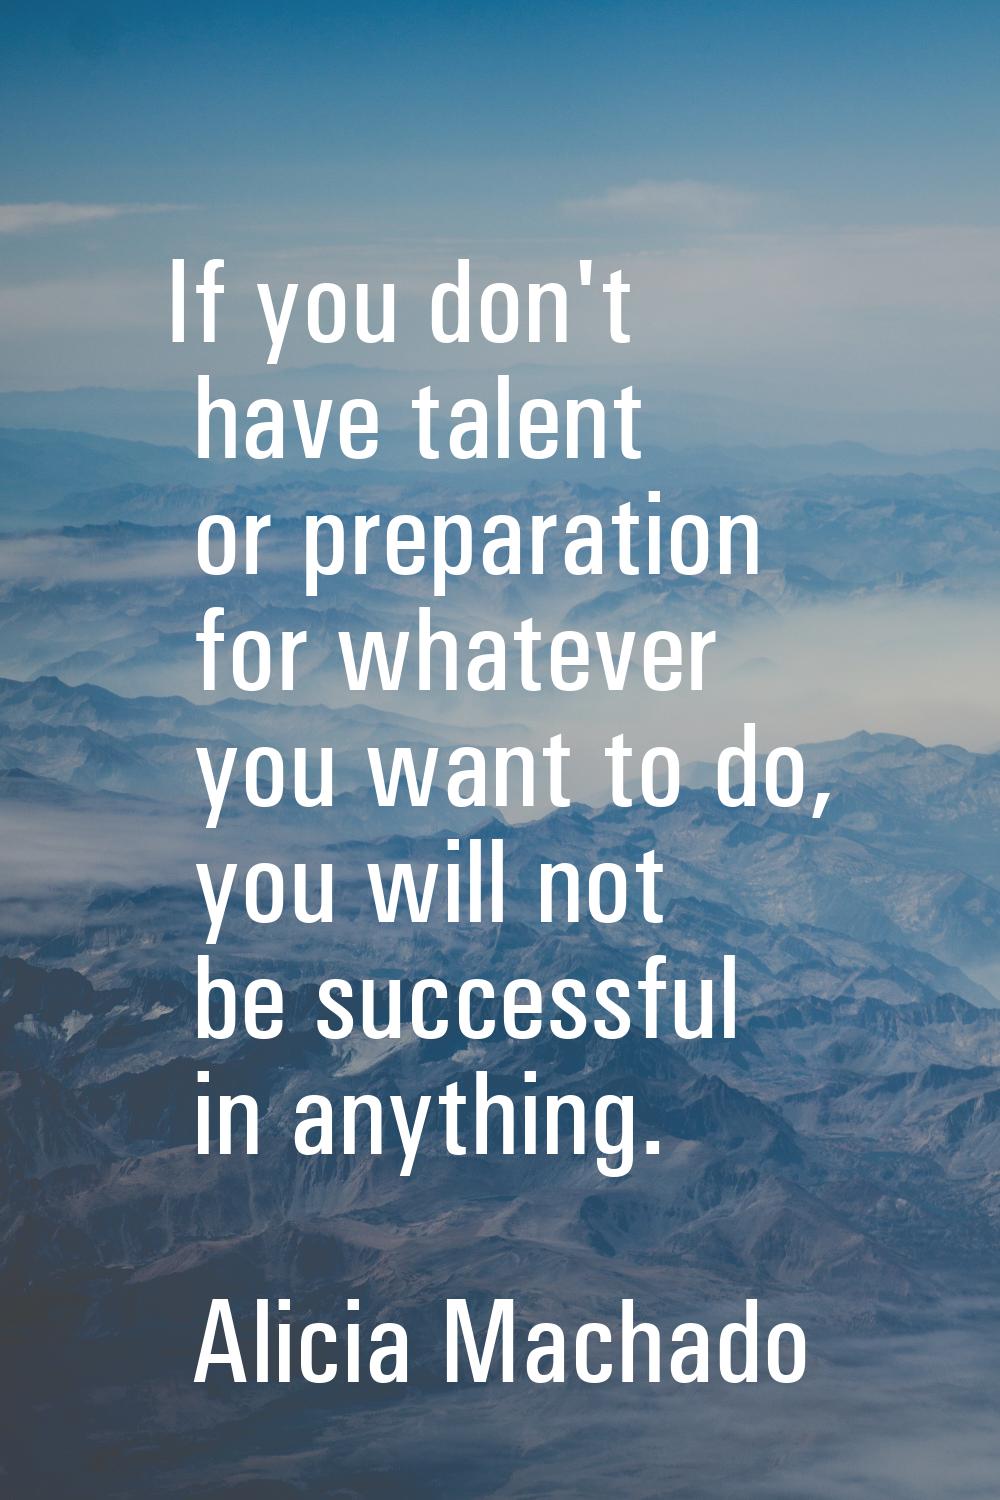 If you don't have talent or preparation for whatever you want to do, you will not be successful in 